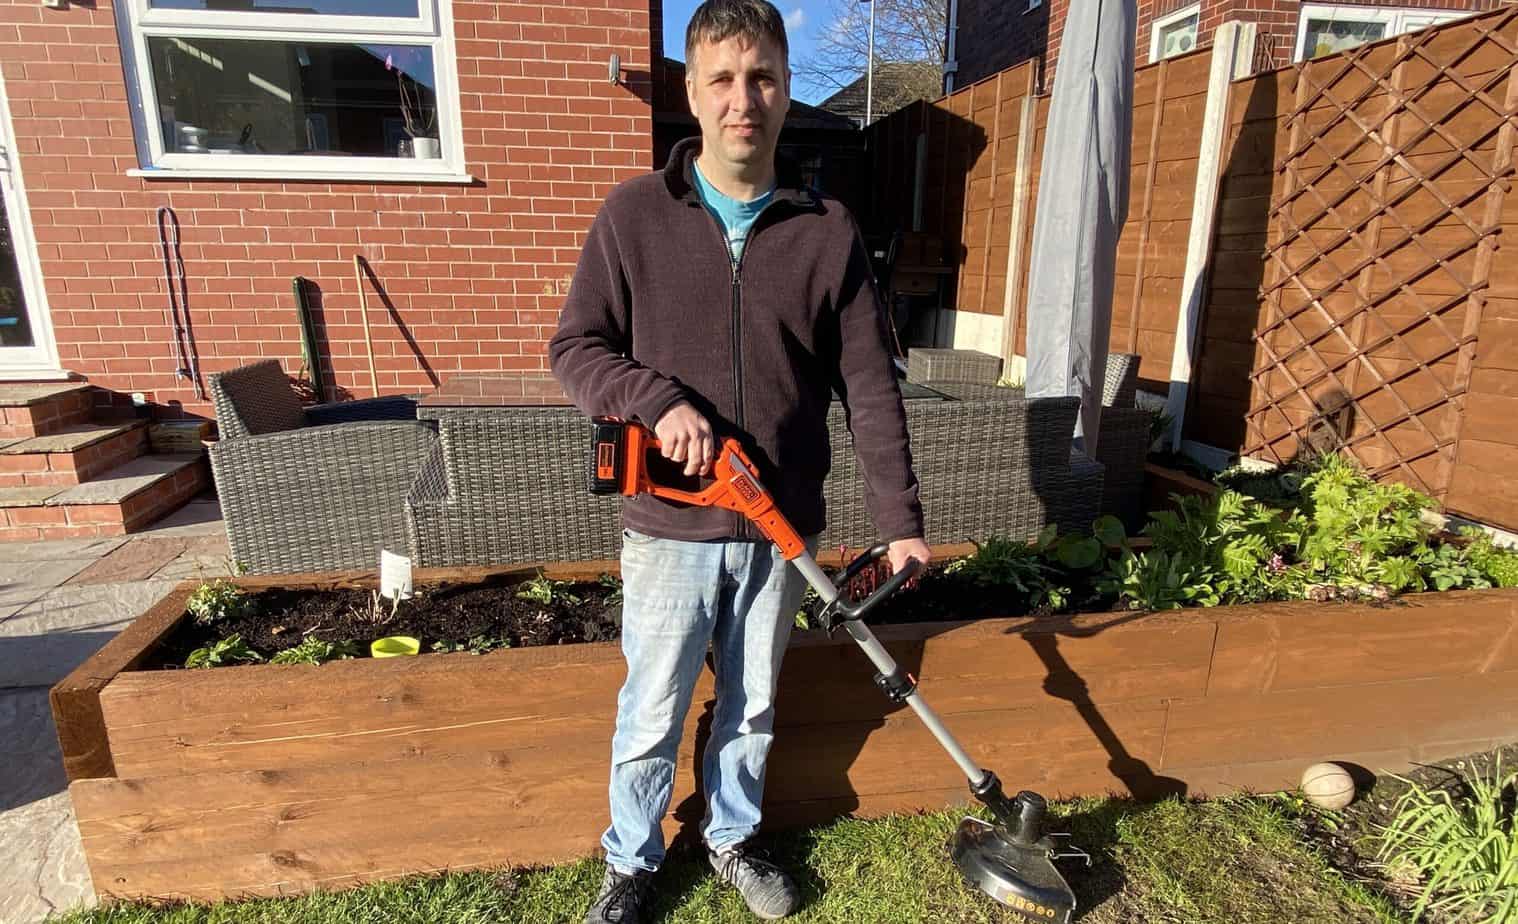 https://www.pyracantha.co.uk/wp-content/uploads/2021/04/Black-Decker-36V-Cordless-Strimmer-Review-After-12-Months-scaled.jpg